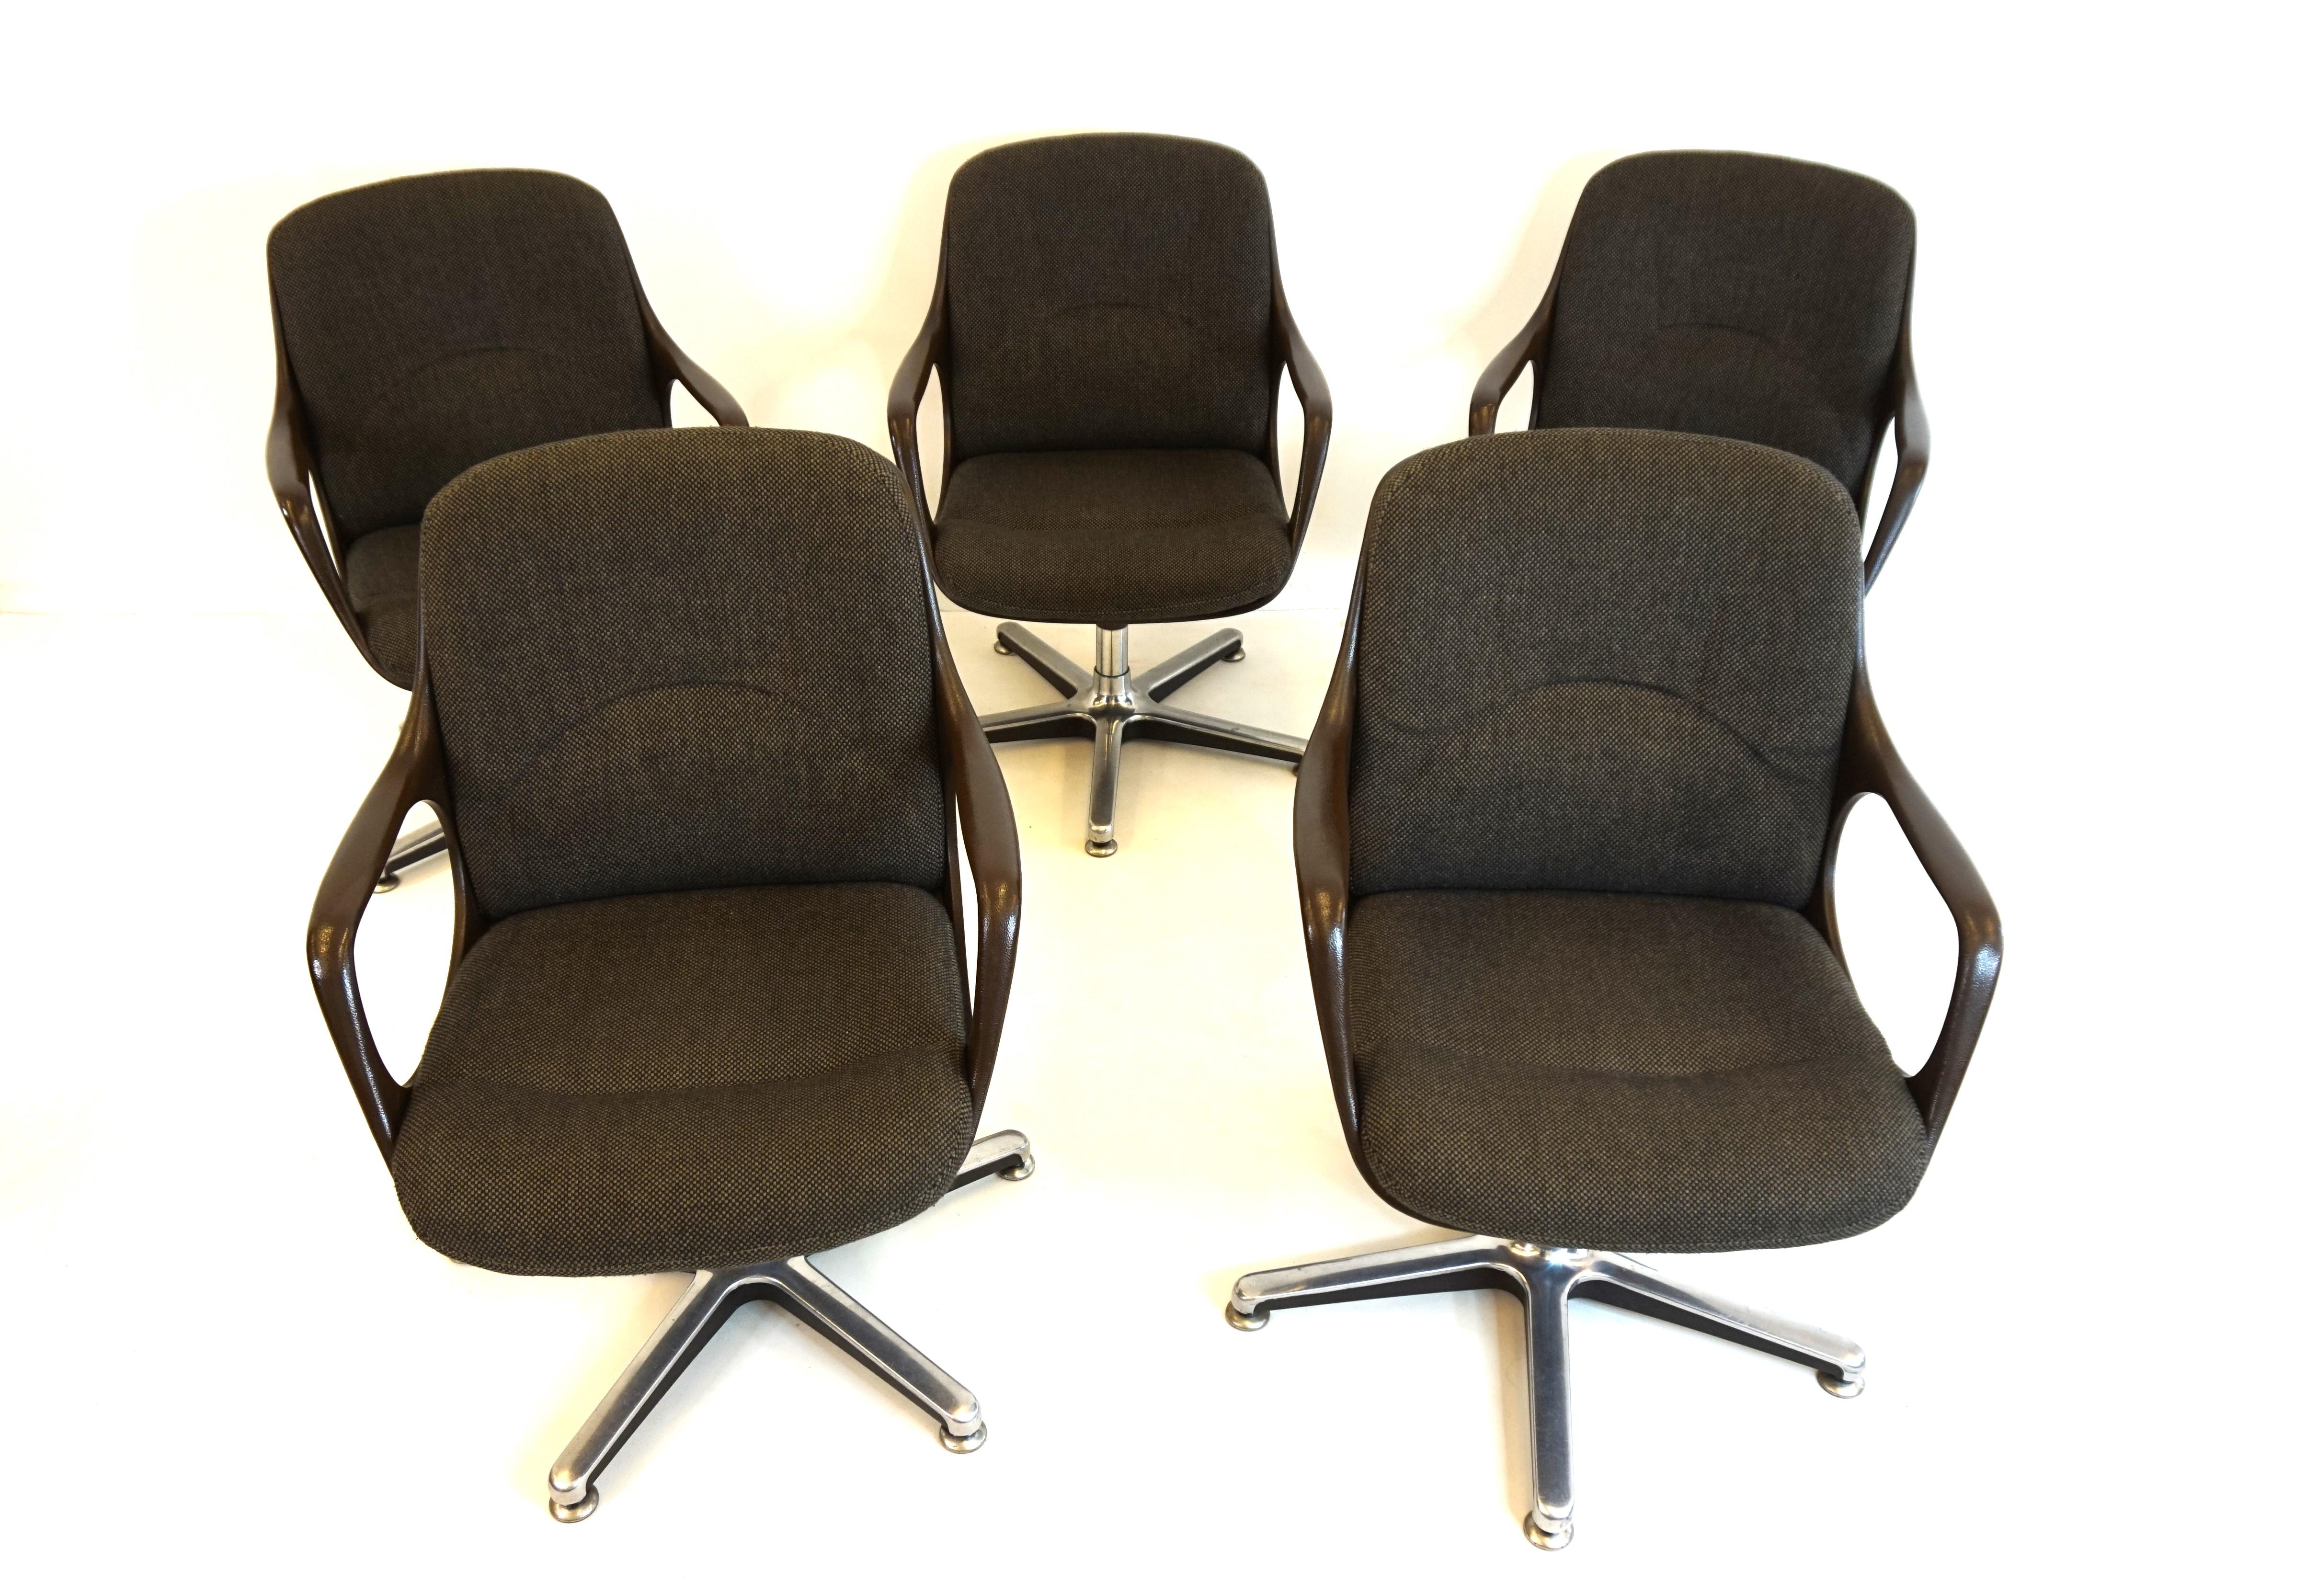 Chromcraft Set of 5 Space Age Office/Dining Room Chairs 11